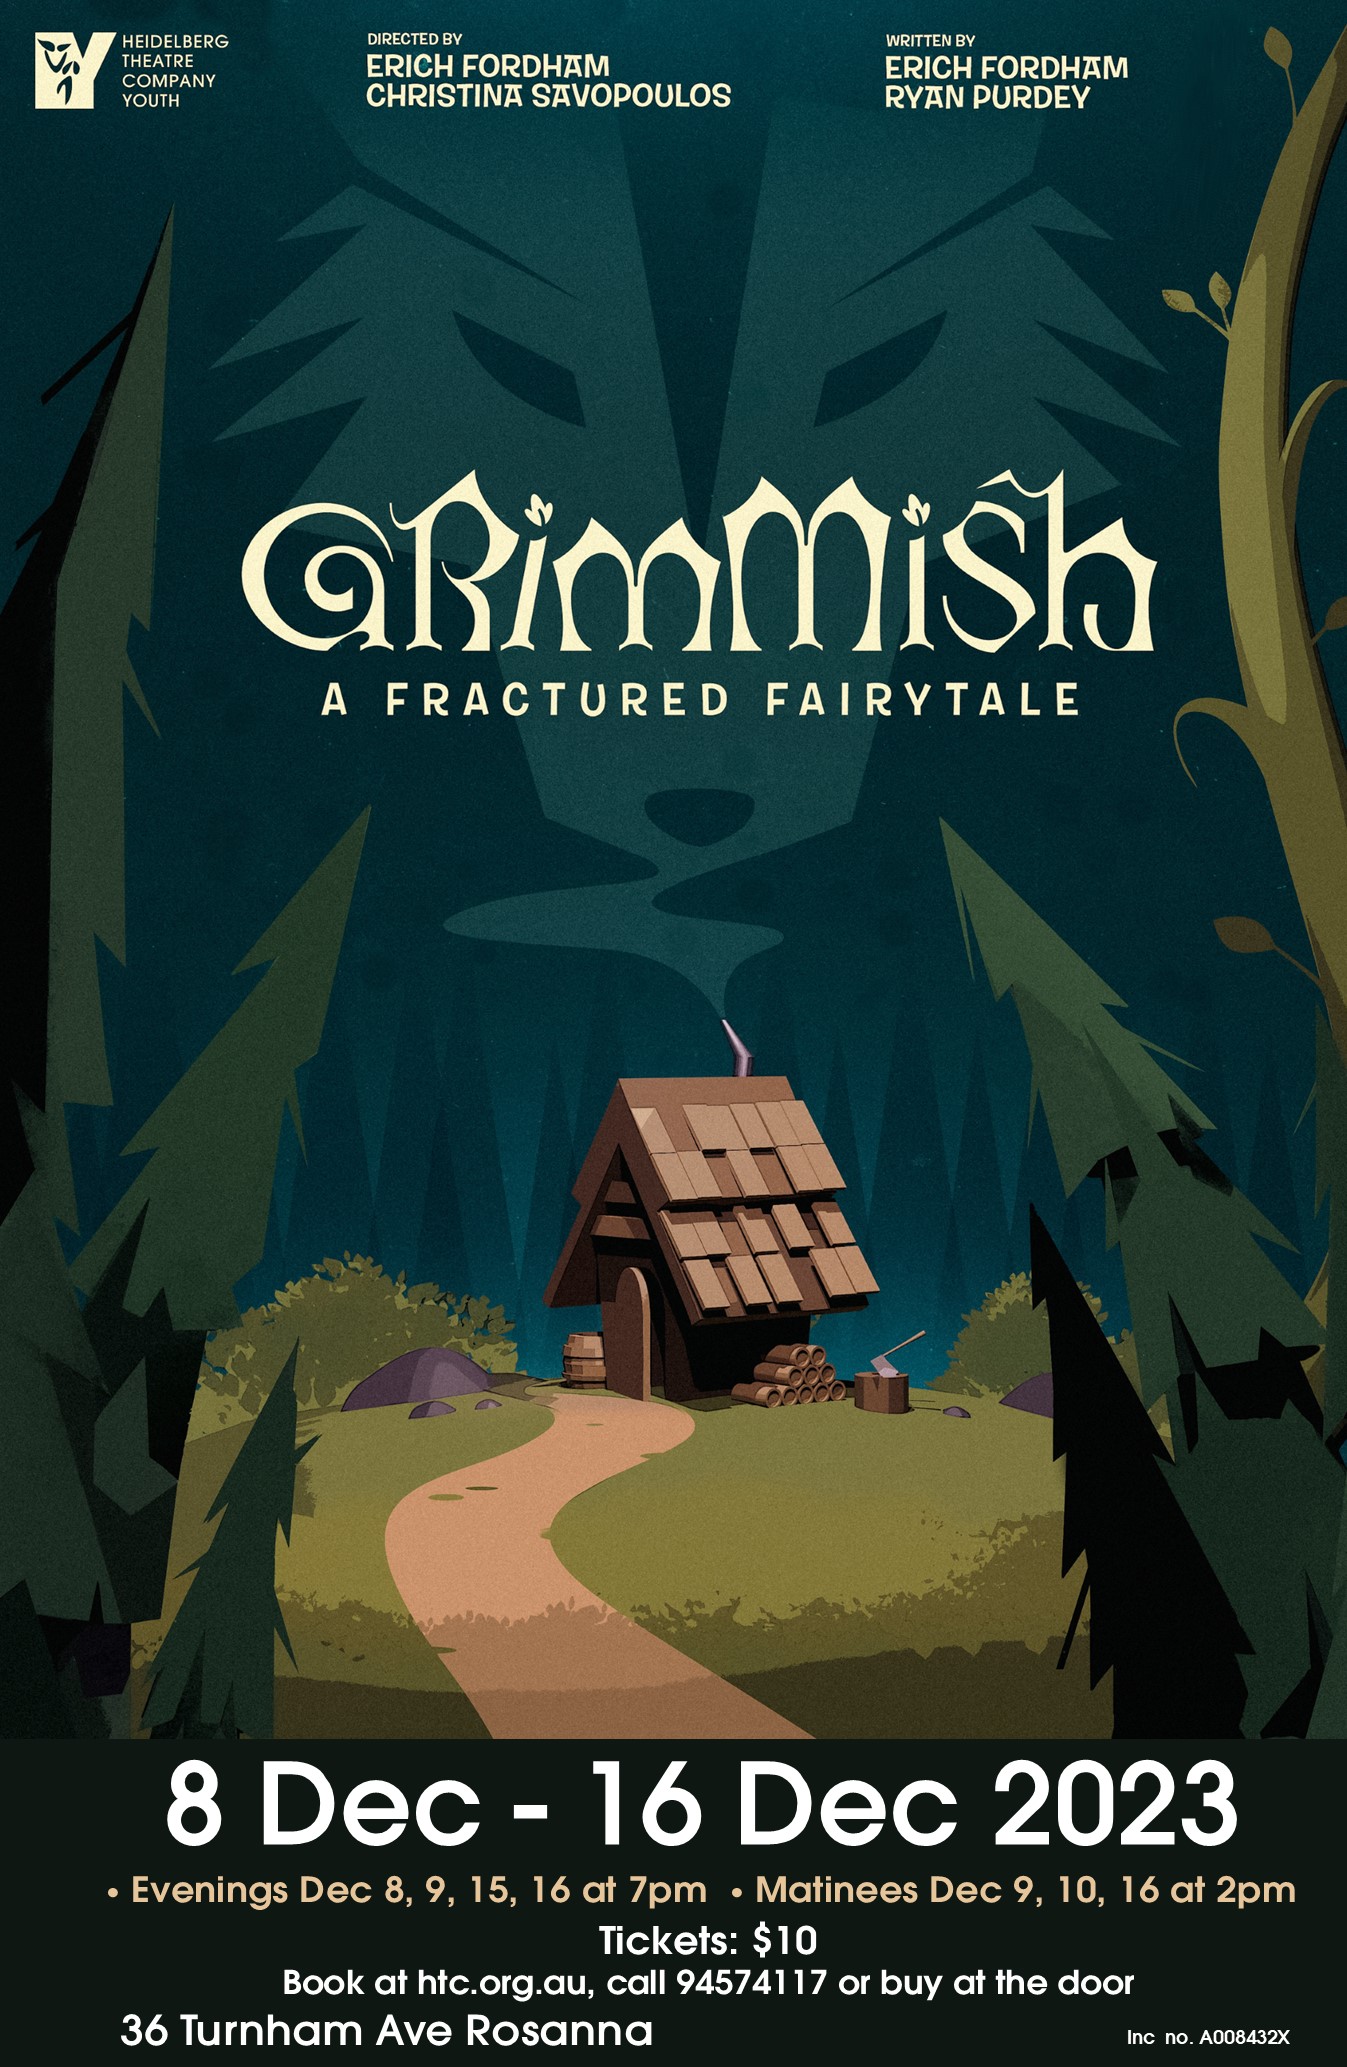 GRIMMISH - a fractured fairytale